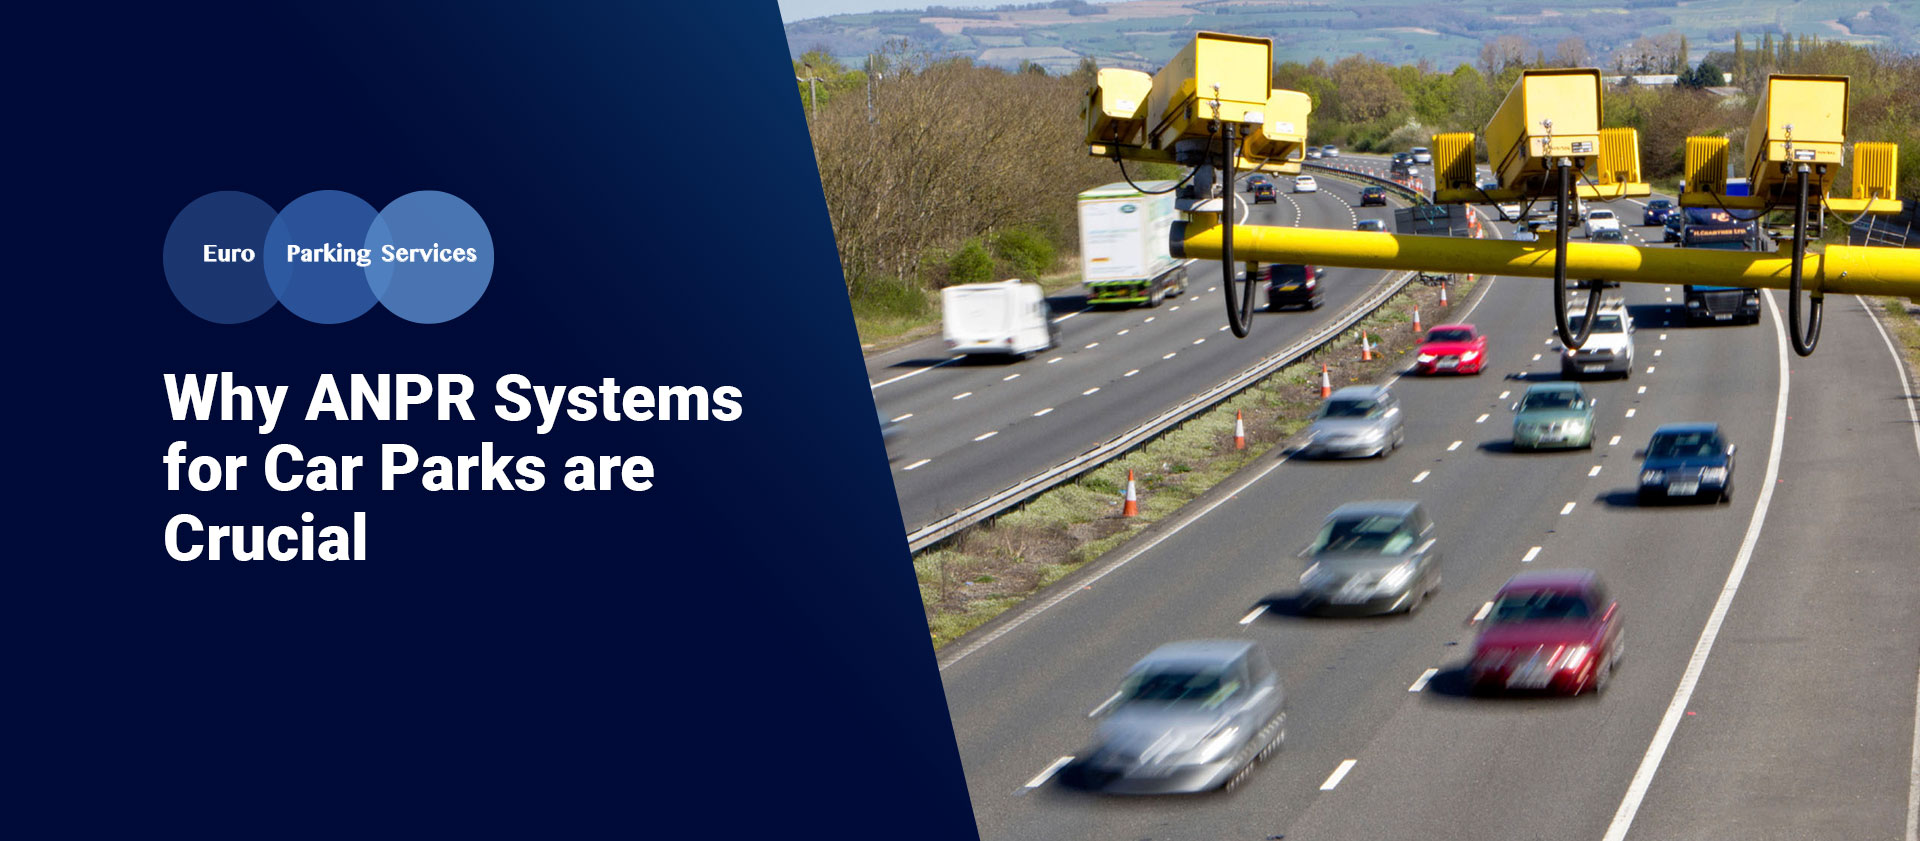 Why ANPR Systems for Car Parks are Crucial